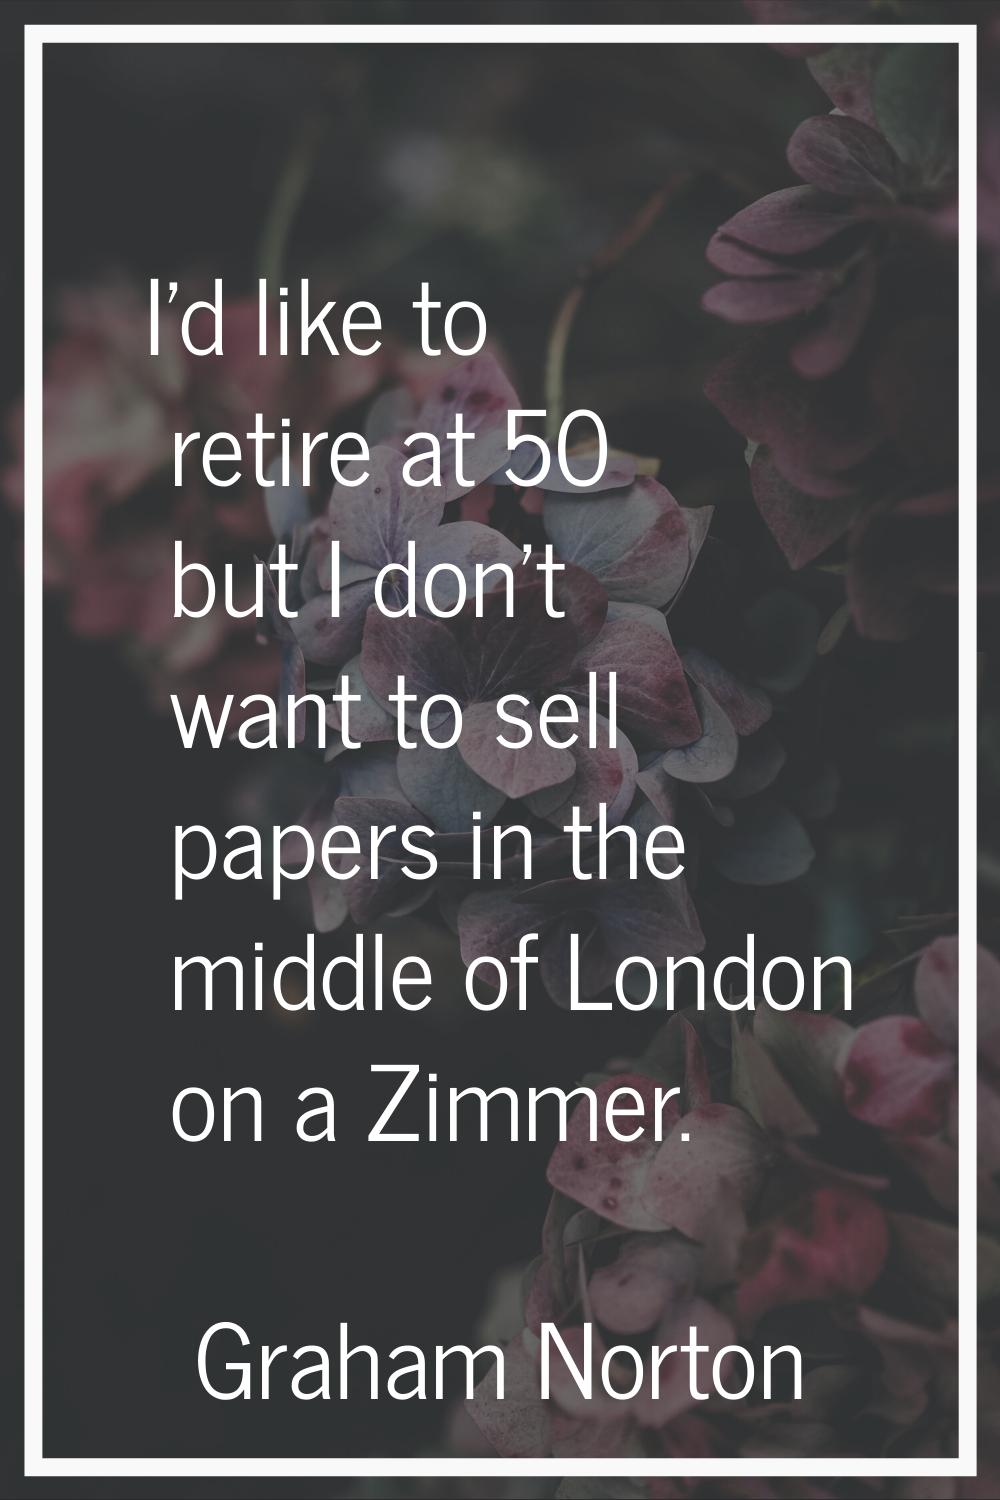 I'd like to retire at 50 but I don't want to sell papers in the middle of London on a Zimmer.